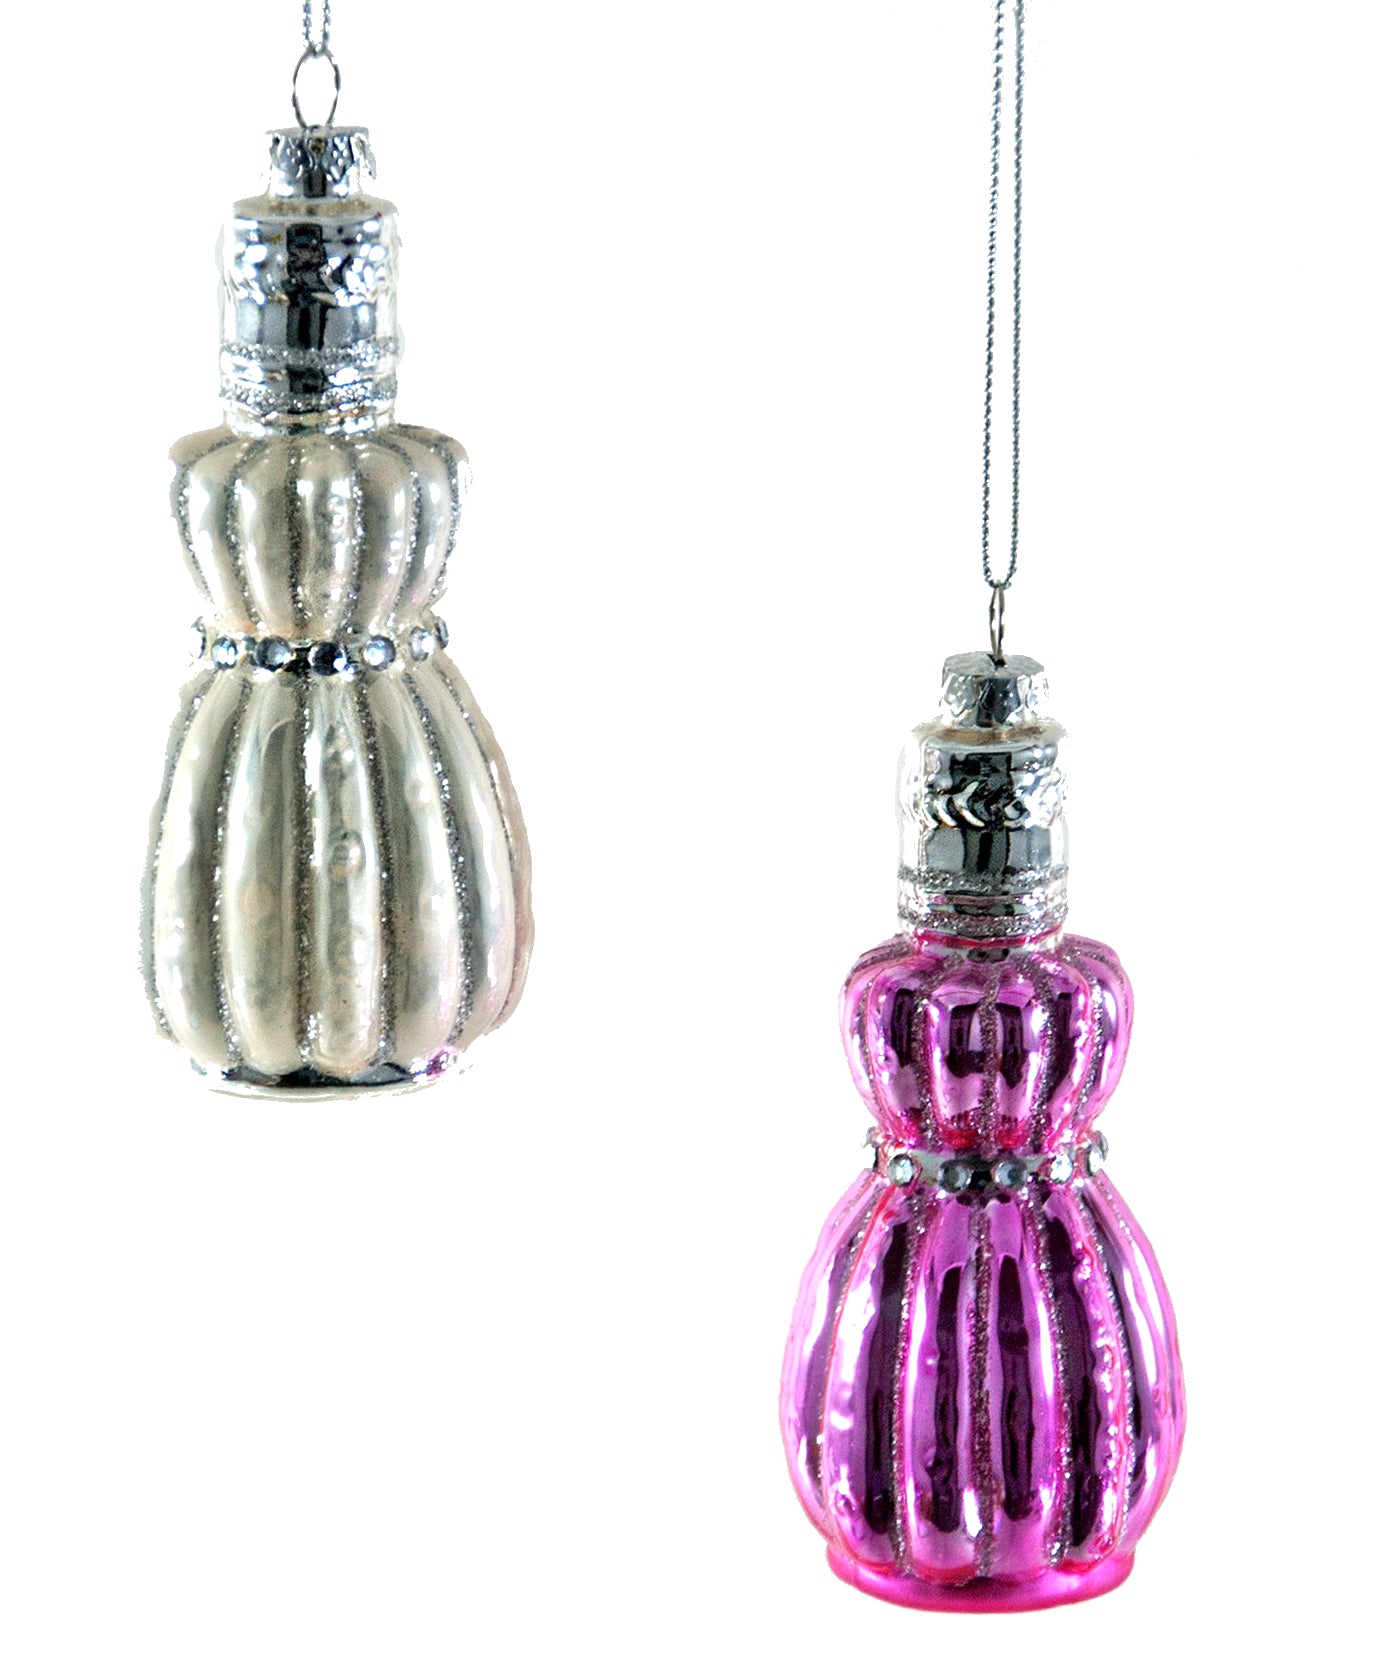 French Perfume Bottle Ornaments